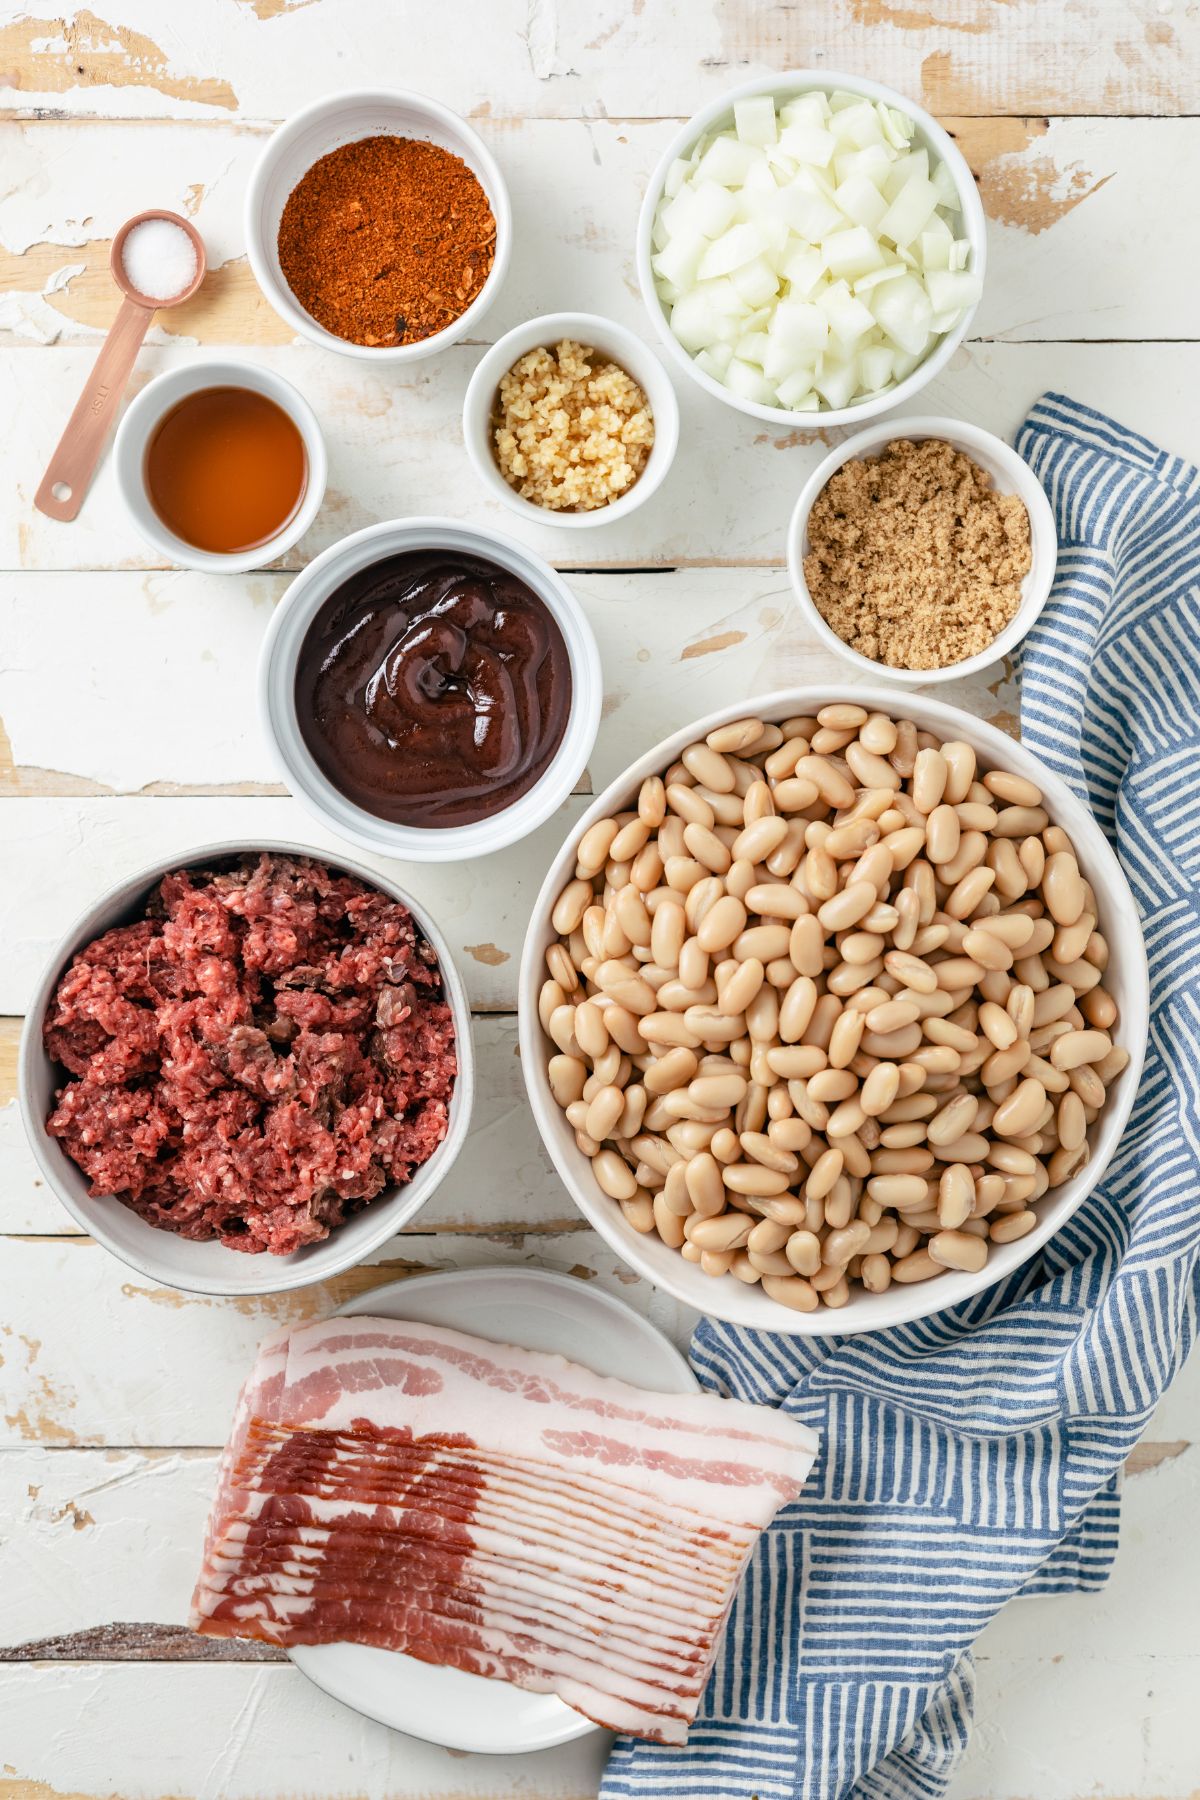 Ingredients for savory baked beans: no sugar-added bacon, diced yellow onion, minced cloves, lean ground beef or turkey, cannellini beans, BBQ seasoning, hickory or Kansas City style BBQ sauce, brown sugar, Hennessy (or your preferred cola or broth), and sea salt, each in its own bowl.